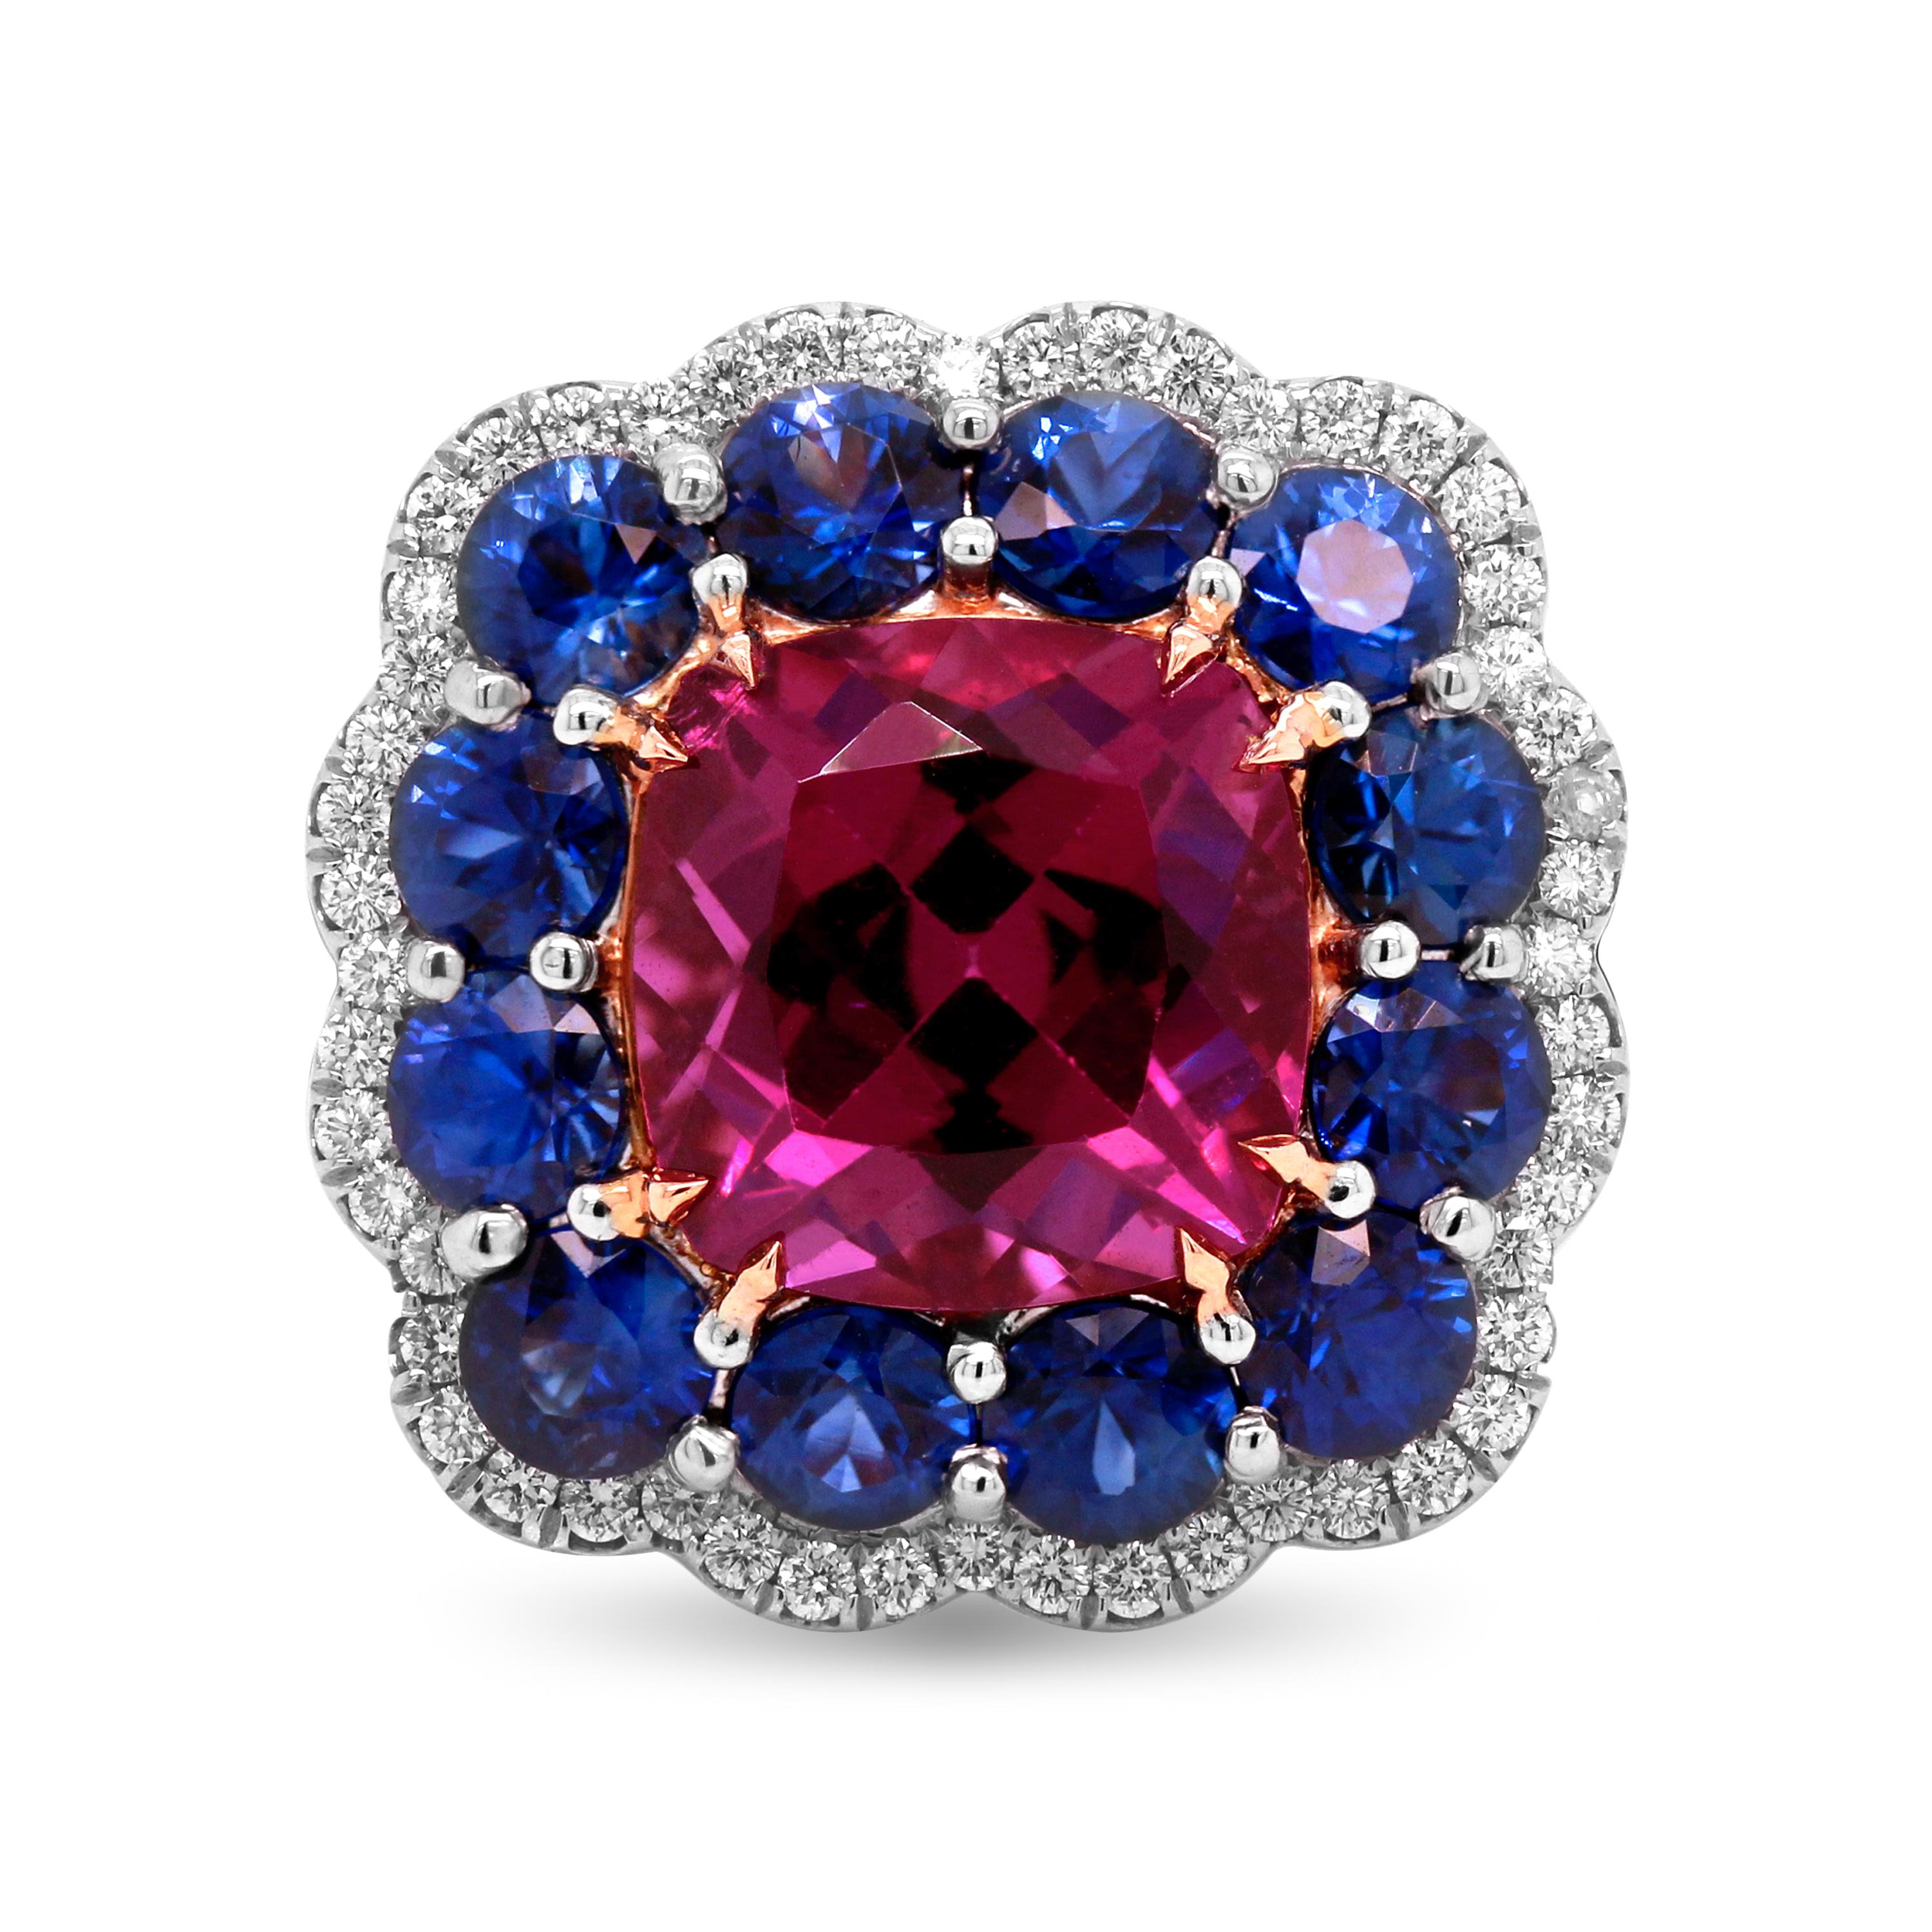 Platinum and 18K Rose Gold Pink Tourmaline Blue Sapphire Diamond Cocktail Ring

This one-of-a-kind ring features a cushion-cut pink tourmaline with blue sapphires and diamonds surrounding.

5.42 carat Pink Tourmaline center

2.99 carat Blue